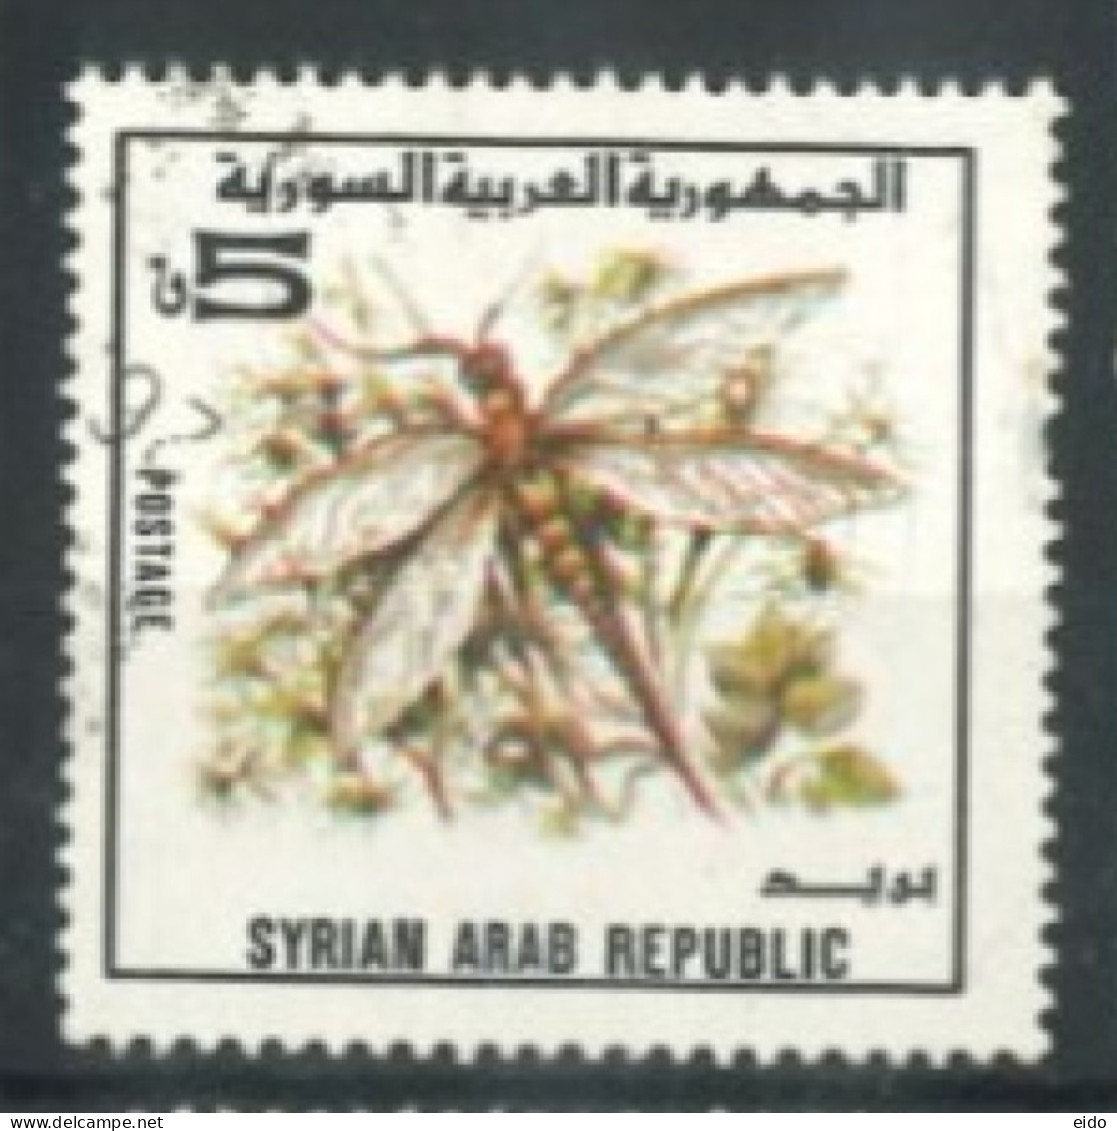 SYRIA - 1982, INSECTS STAMP, SG # 1541, USED. - Syrie